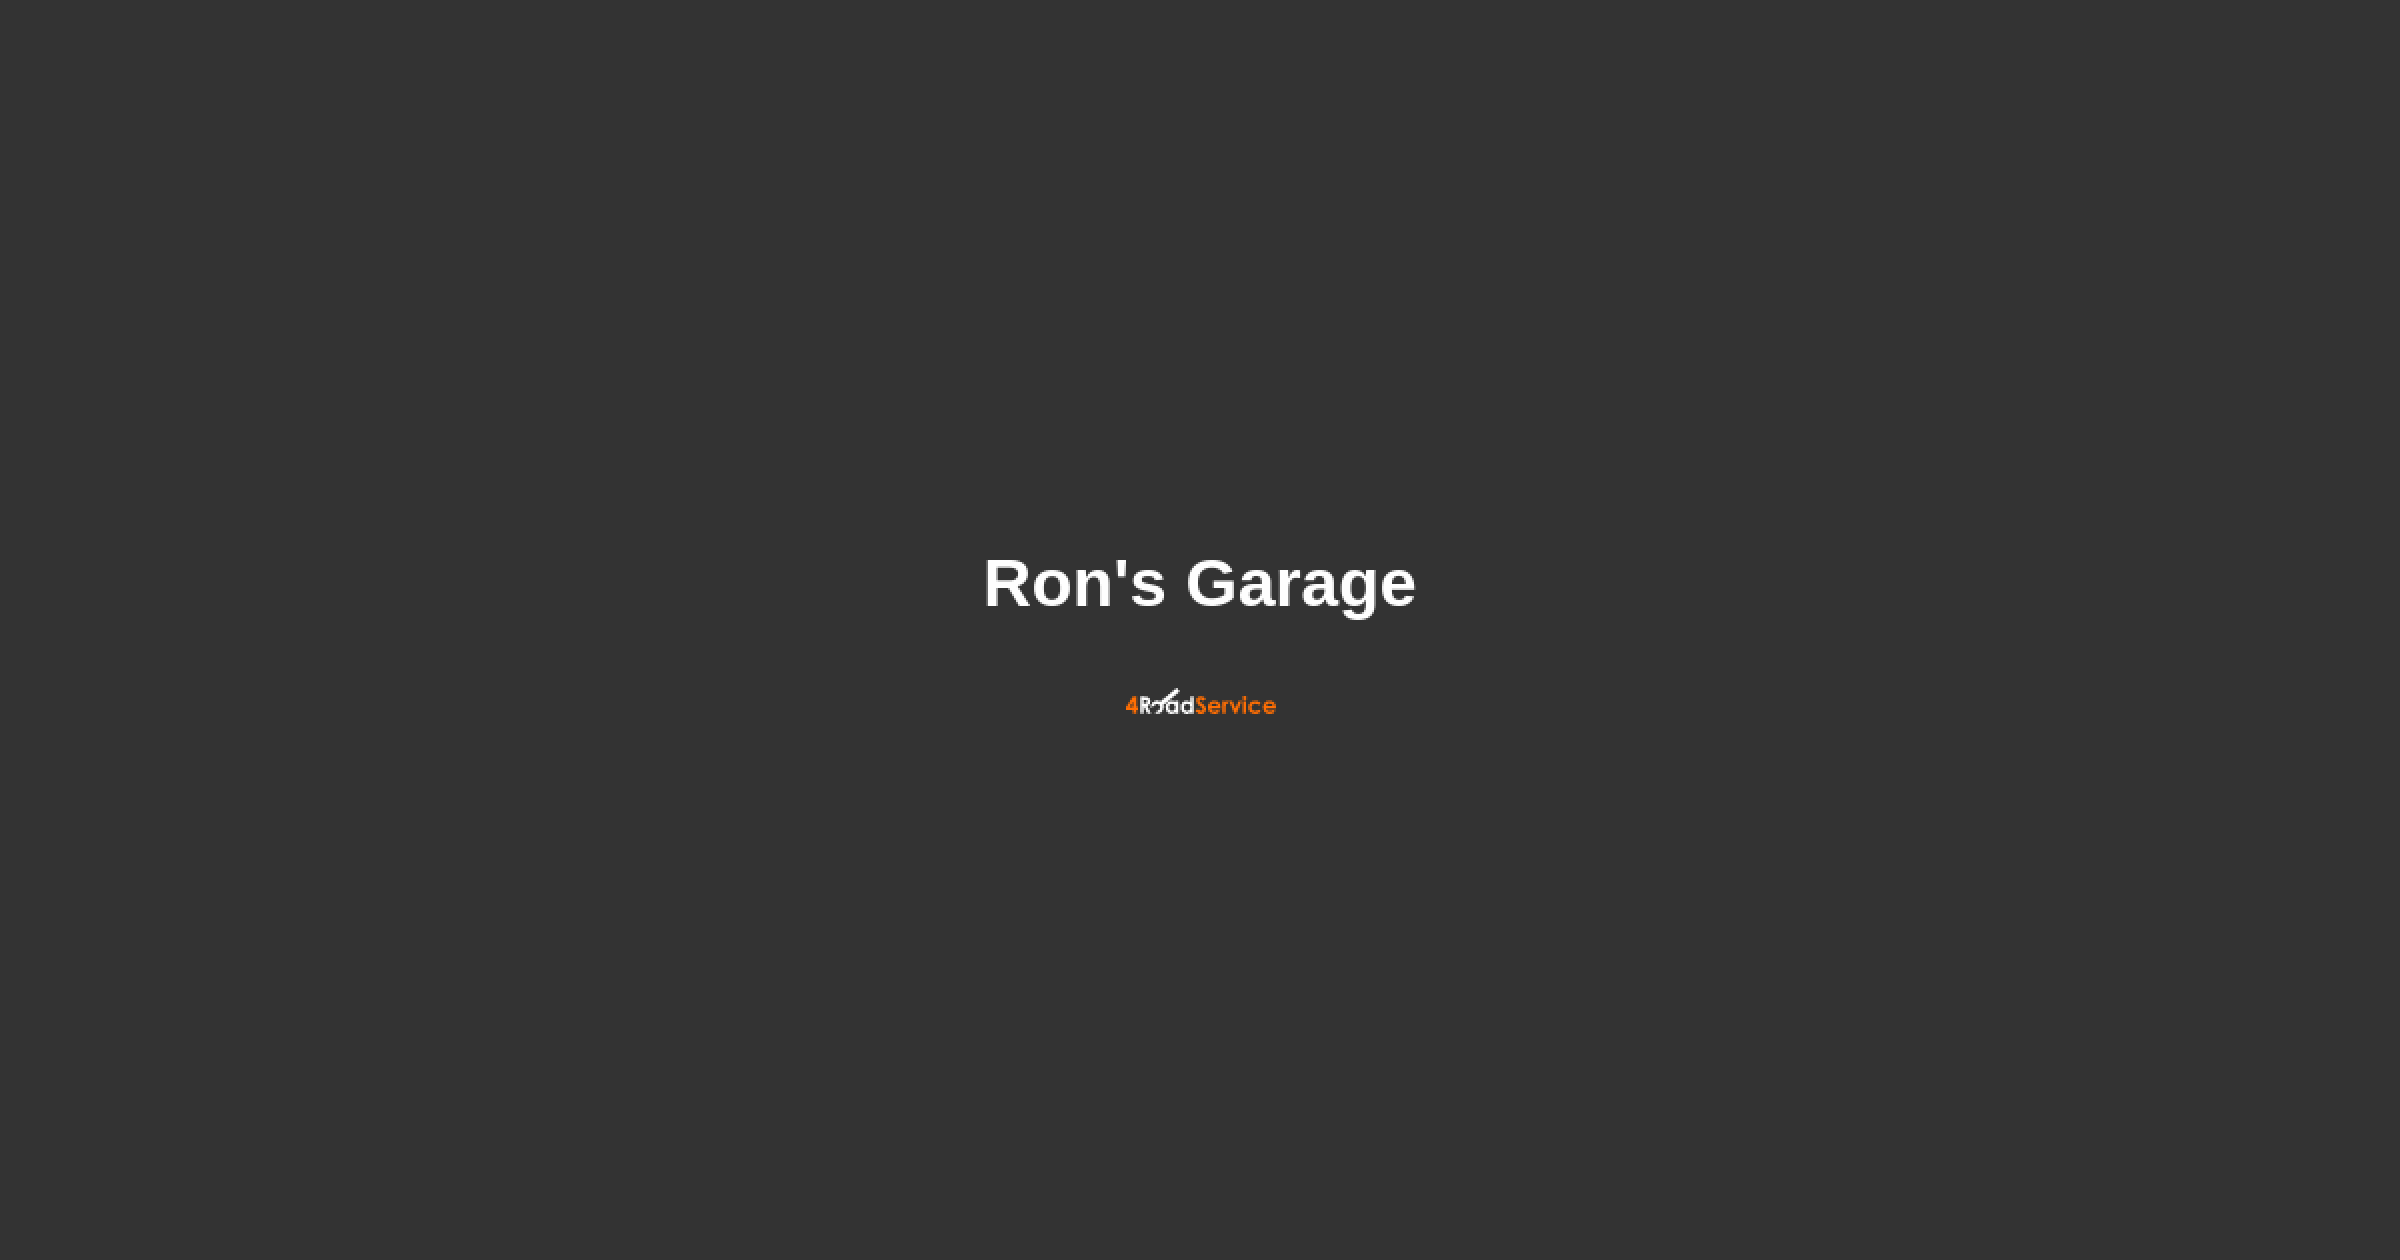 Ron's Garage in Jackson, OH ・ 4 Road Service